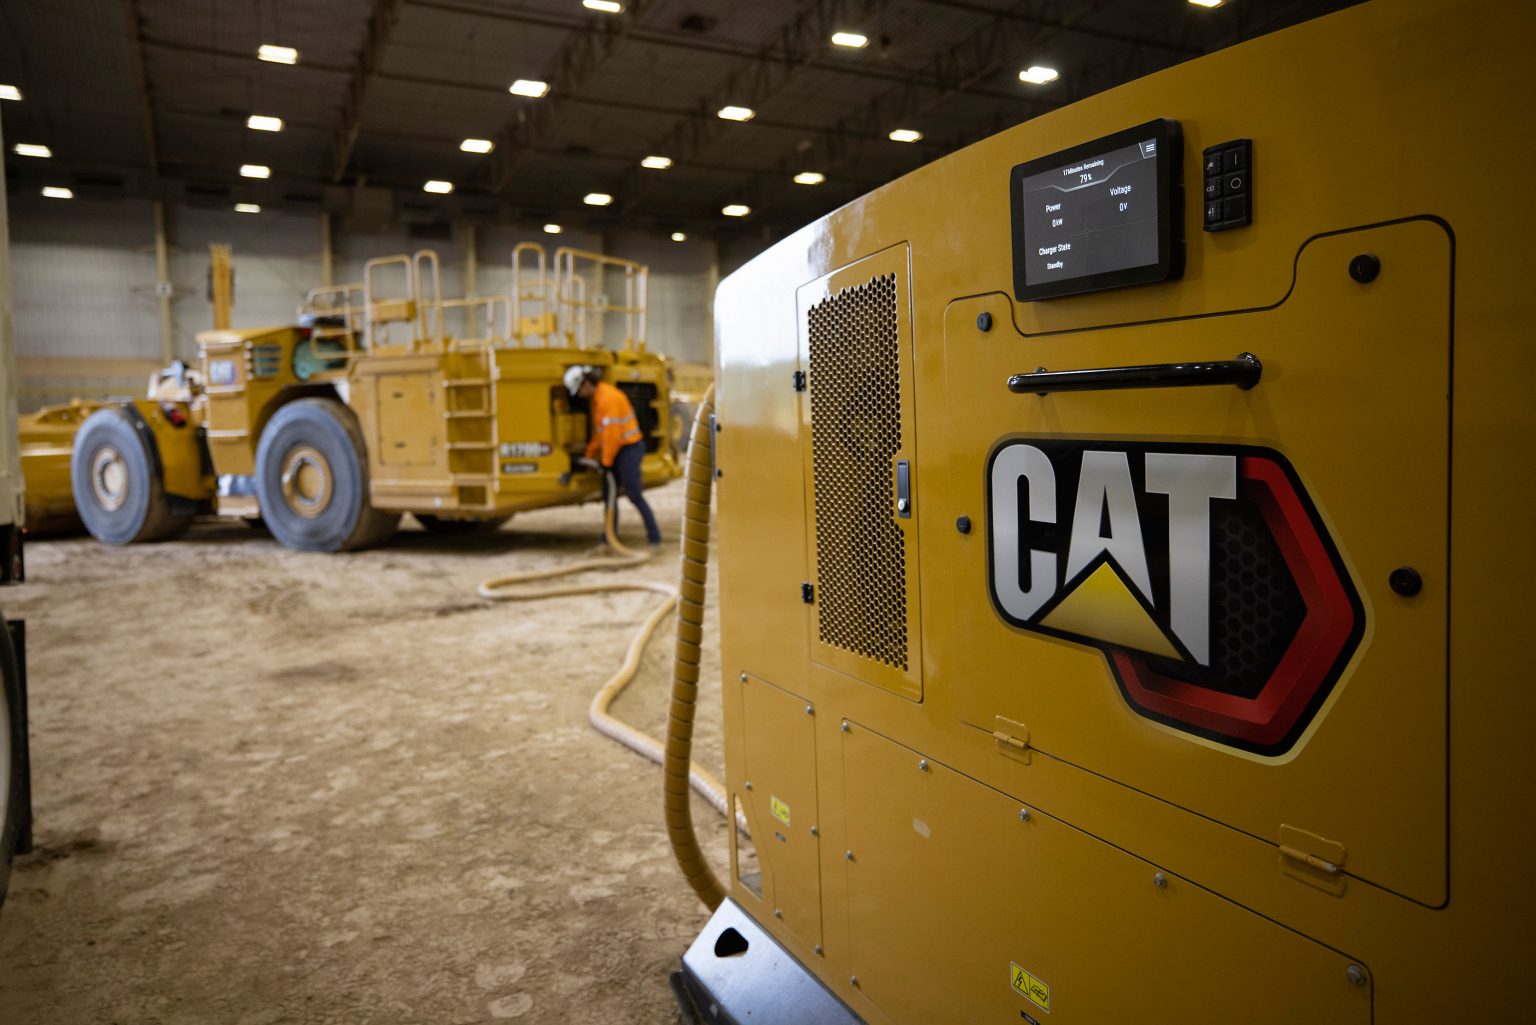 Built Rugged For Underground Mining, The New Cat MEC500 Mobile Equipment Charger Delivers Fast, Simple And Safer Charging